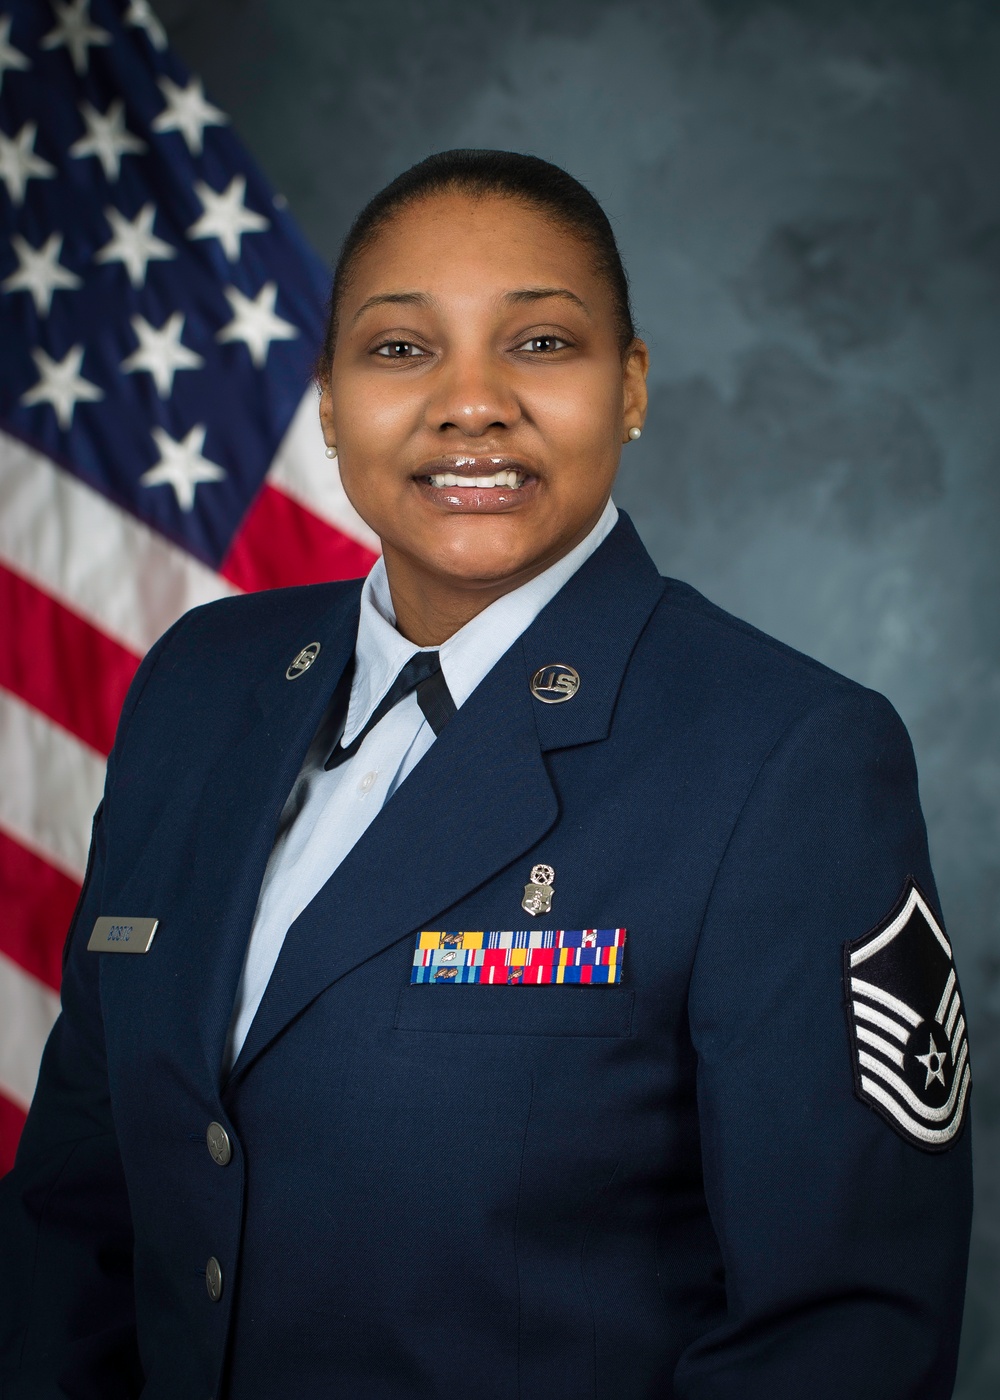 Official portrait, uncovered, of US Air Force Master Sgt. Rachel M. Bostic